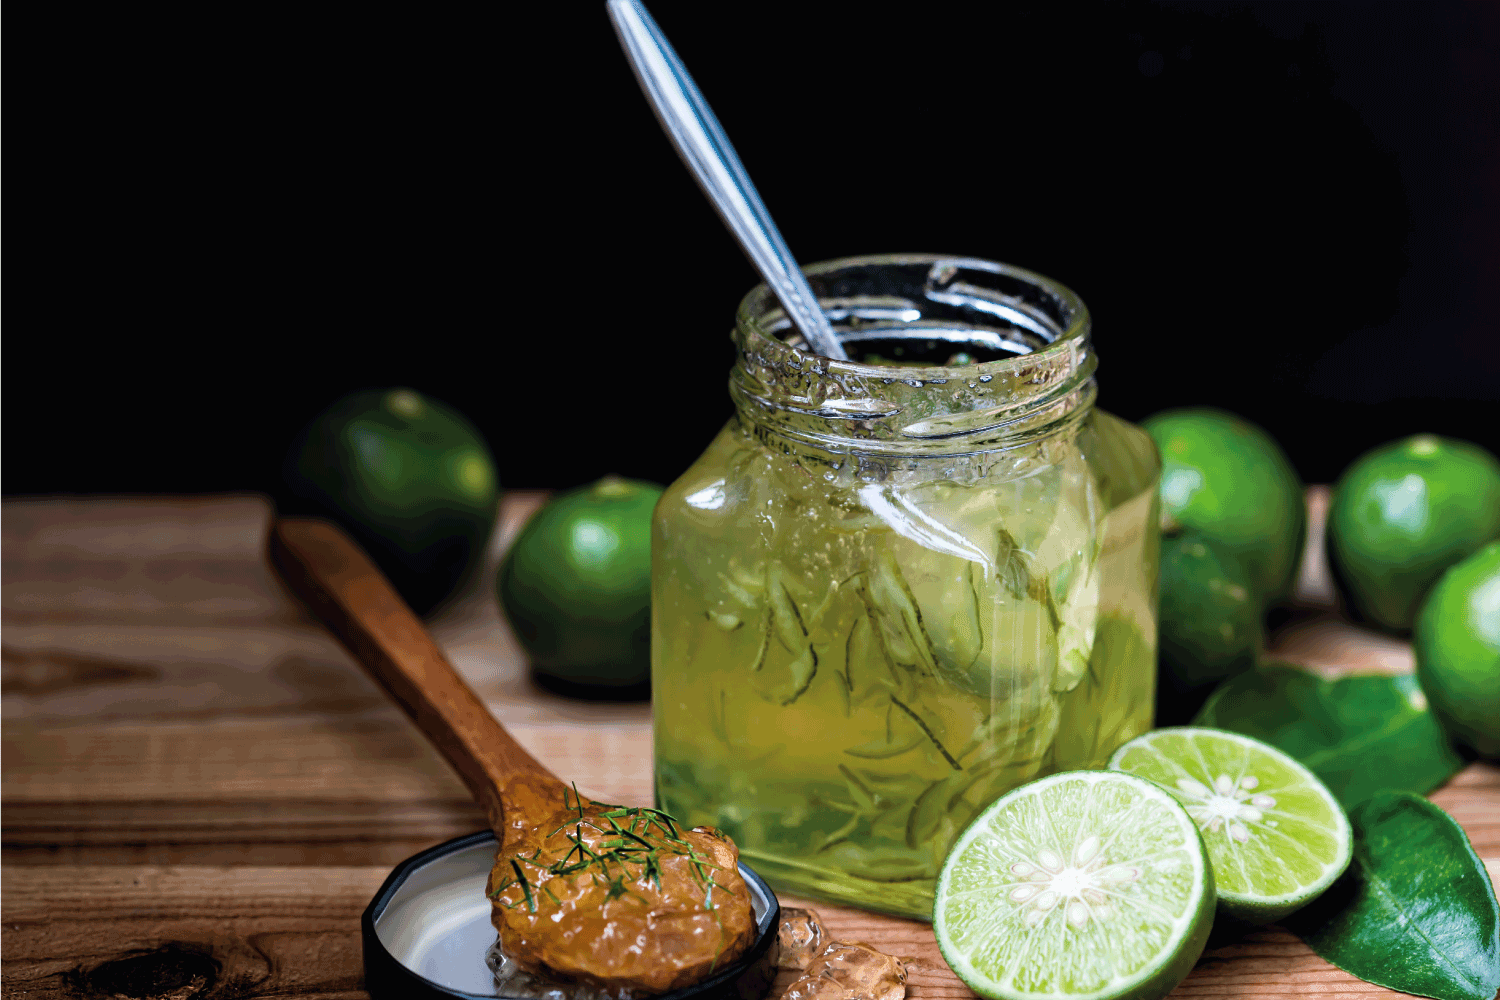 Lime jam in a glass bottle on the wooden floor